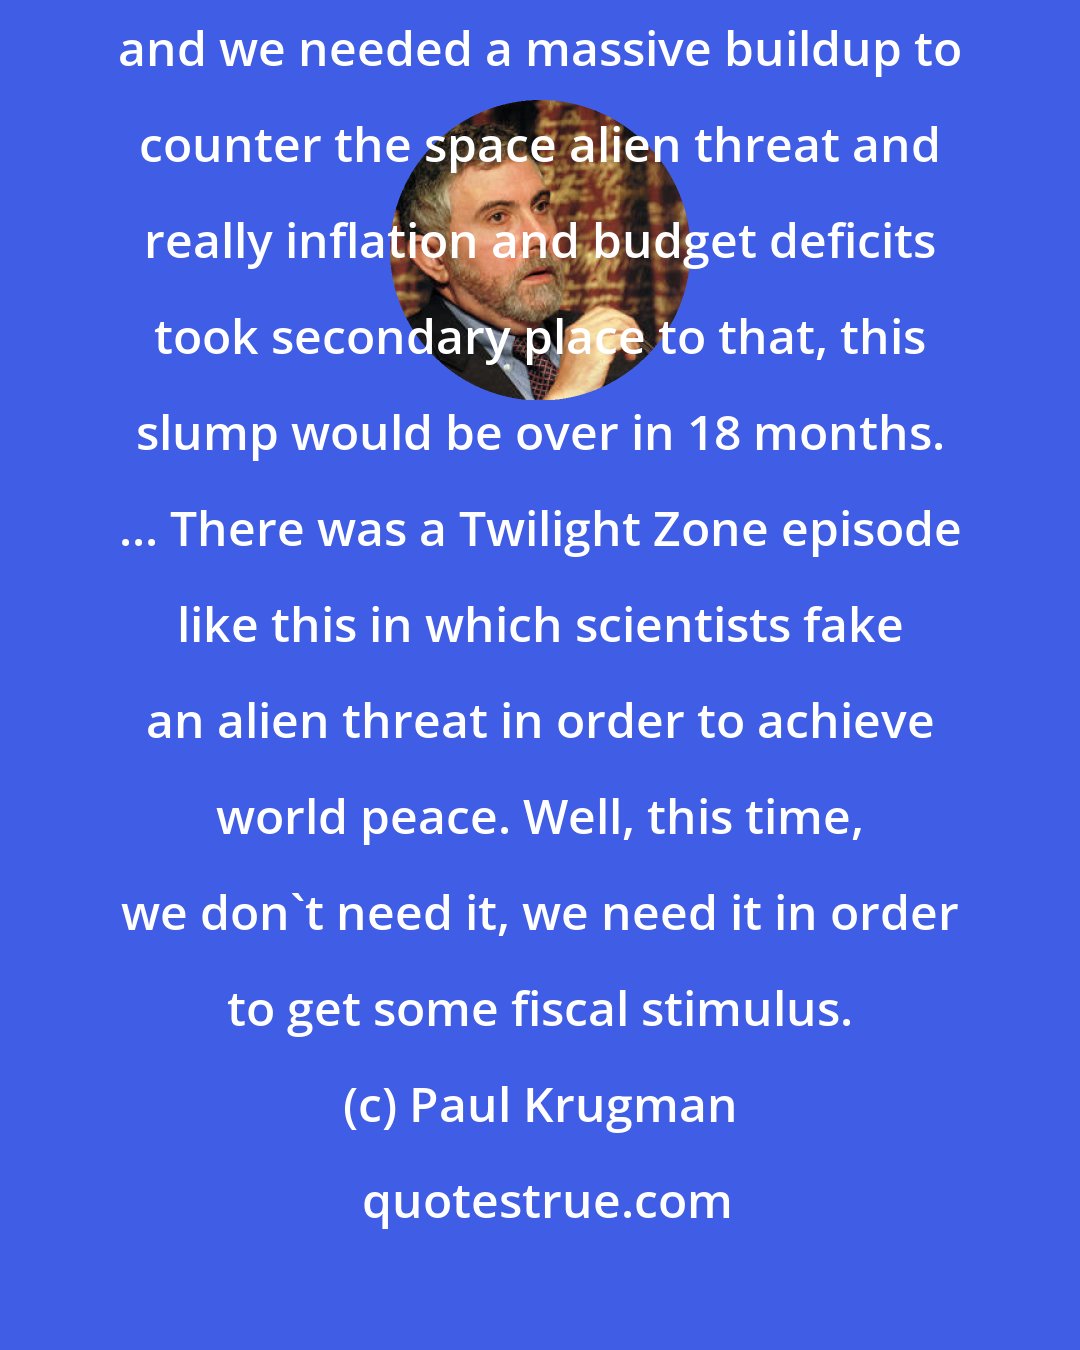 Paul Krugman: If we discovered that, you know, space aliens were planning to attack and we needed a massive buildup to counter the space alien threat and really inflation and budget deficits took secondary place to that, this slump would be over in 18 months. ... There was a Twilight Zone episode like this in which scientists fake an alien threat in order to achieve world peace. Well, this time, we don't need it, we need it in order to get some fiscal stimulus.